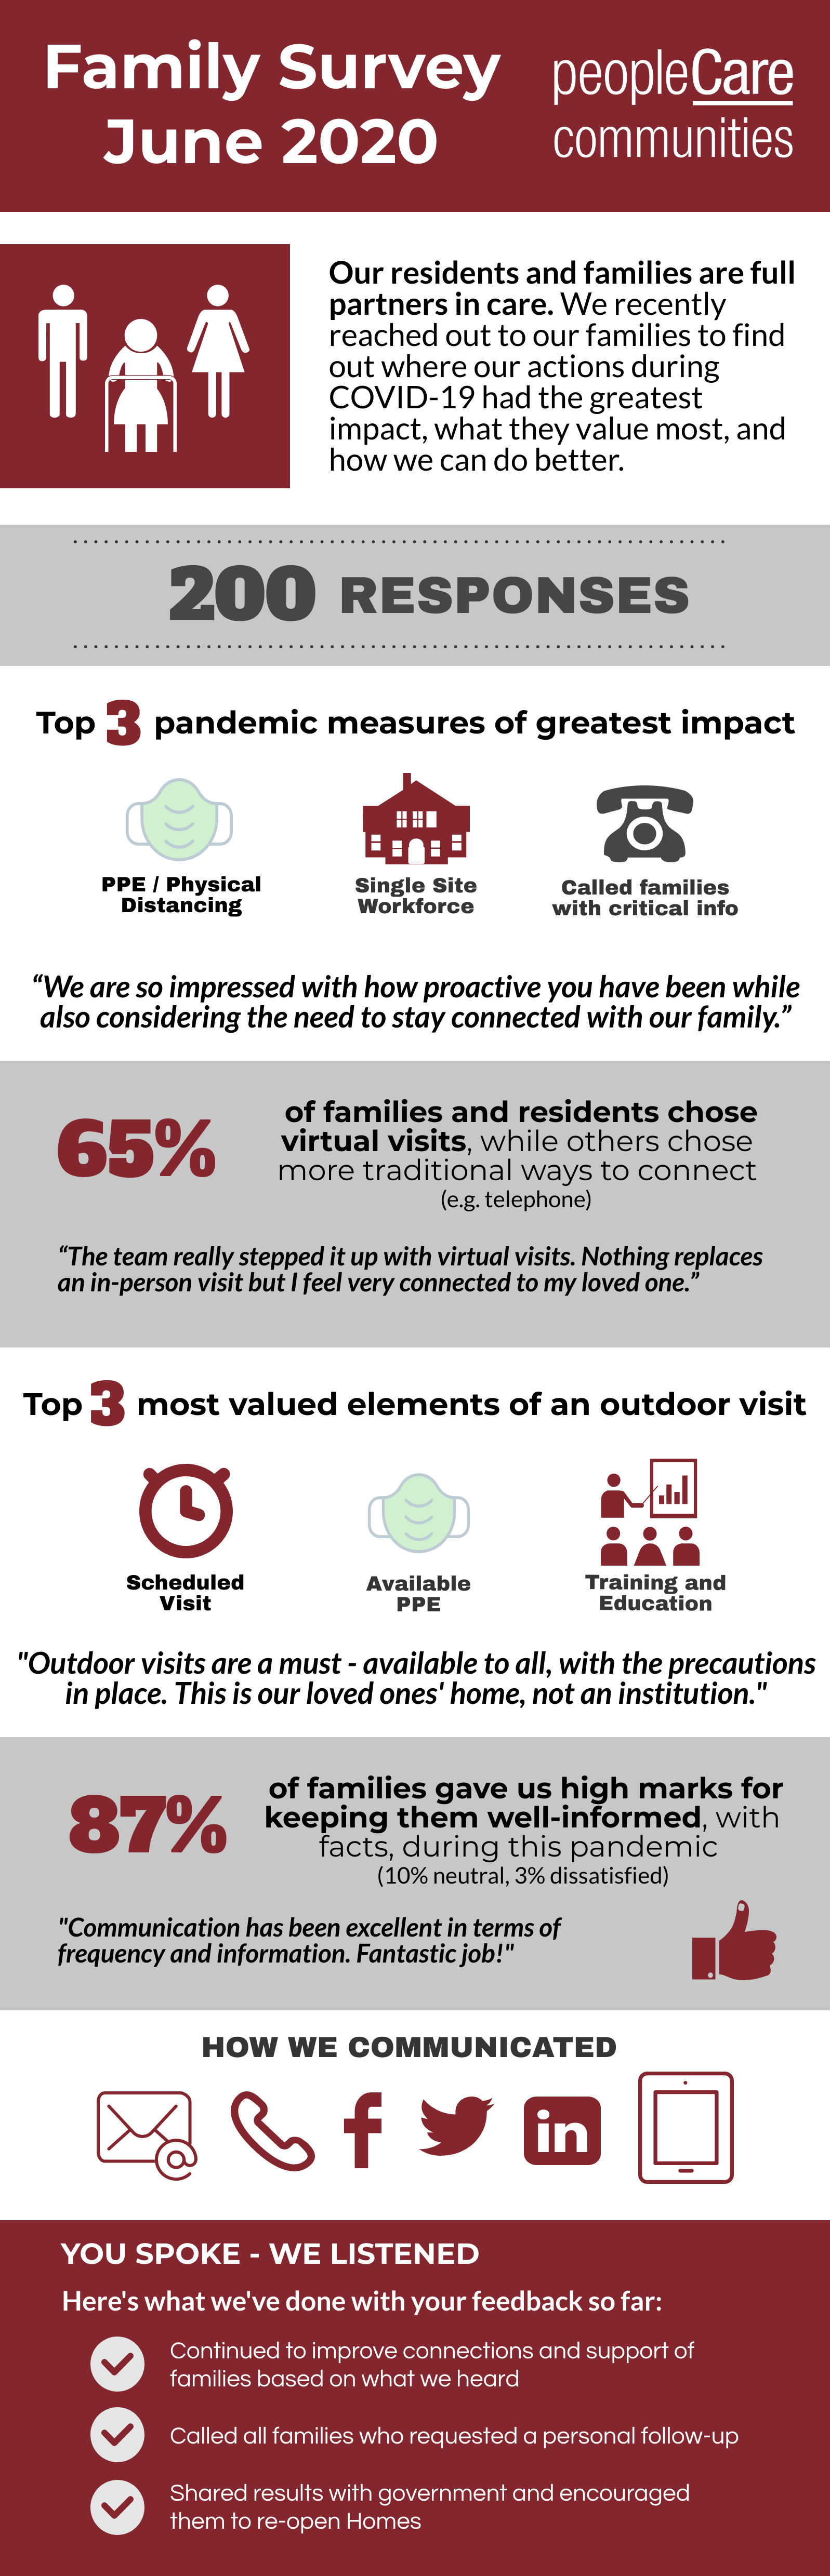 Infographic showing results from peopleCare Communities Family Survey conducted in June 2020.